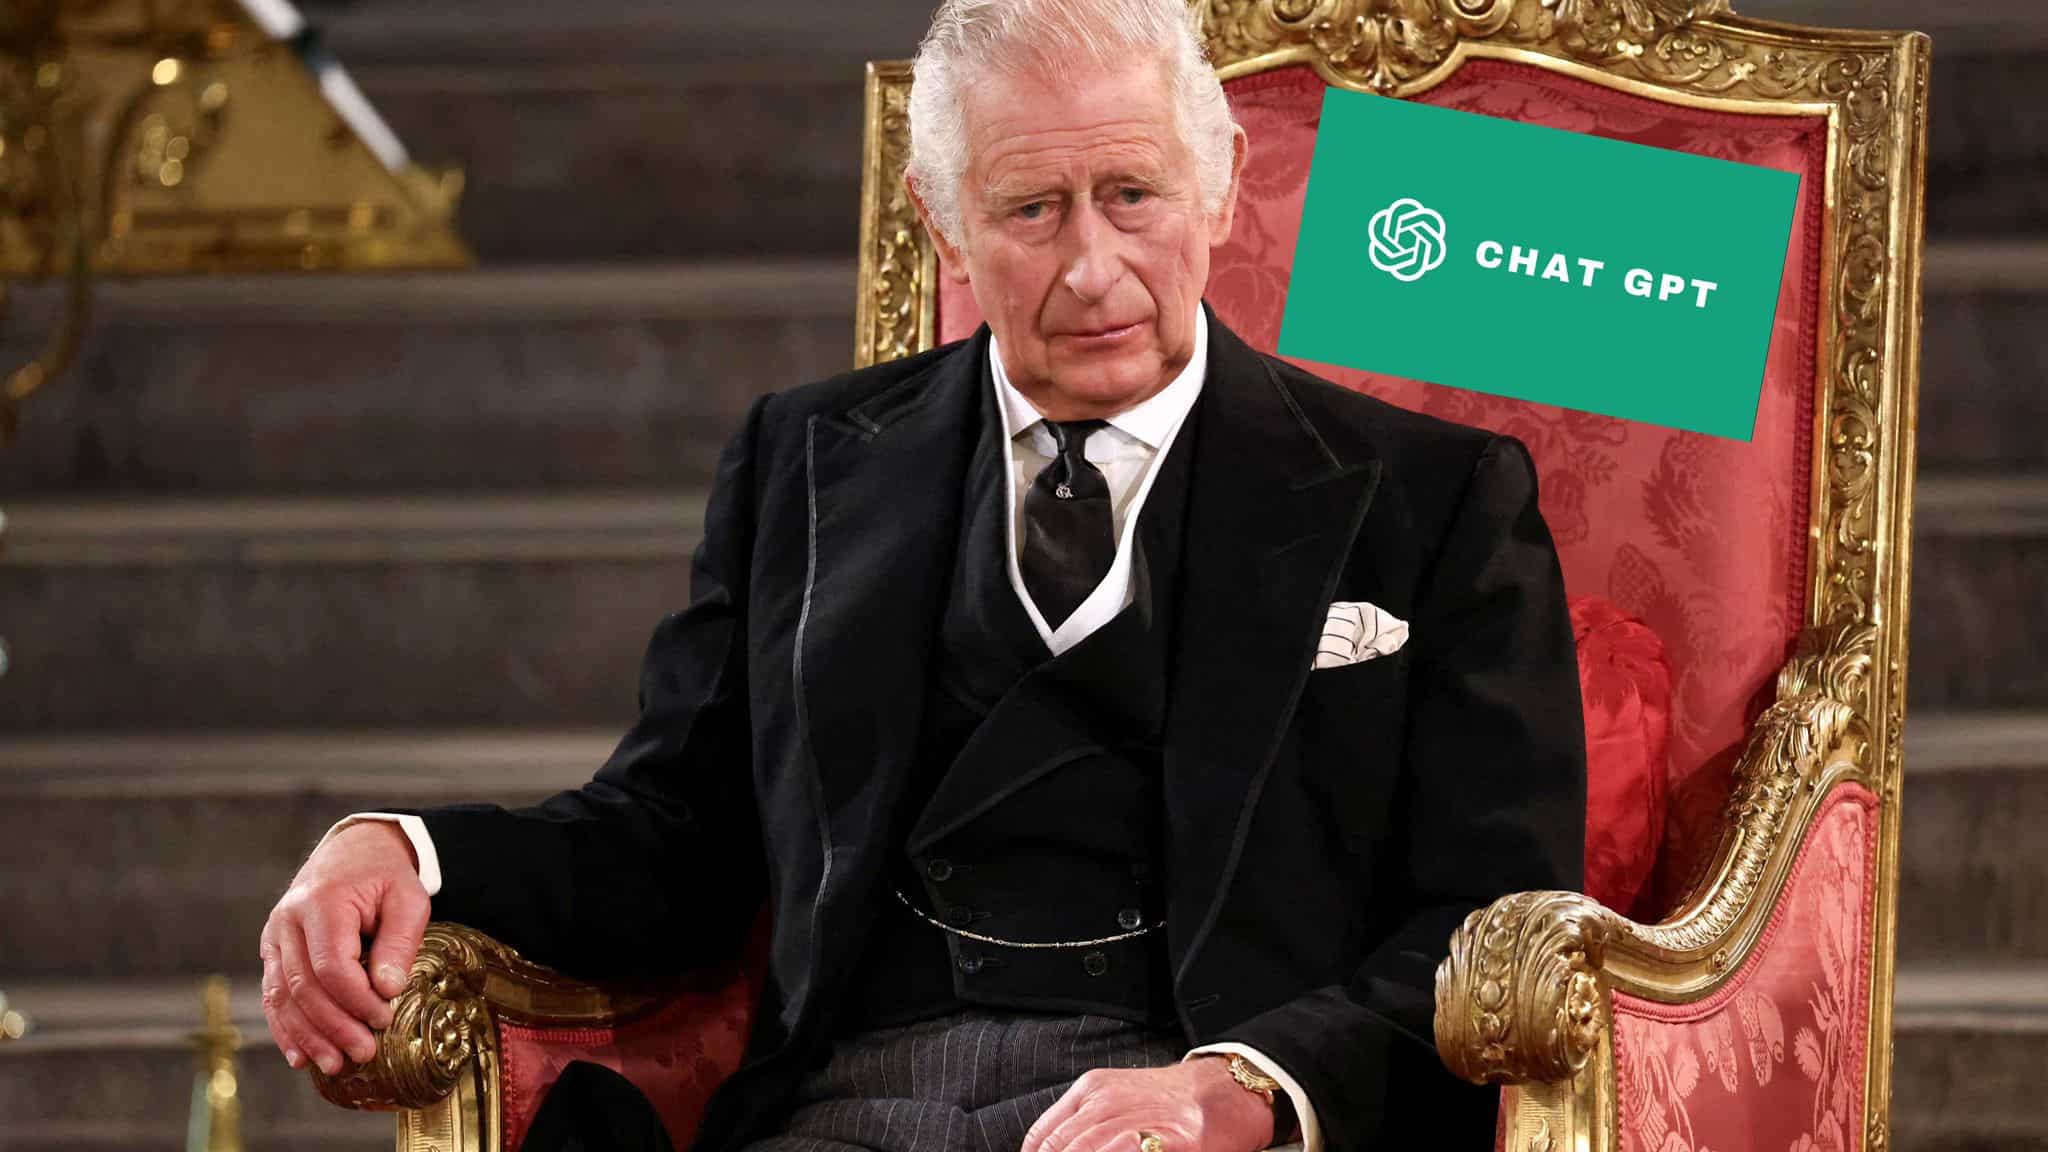 We asked ChatGPT why we should abolish the monarchy